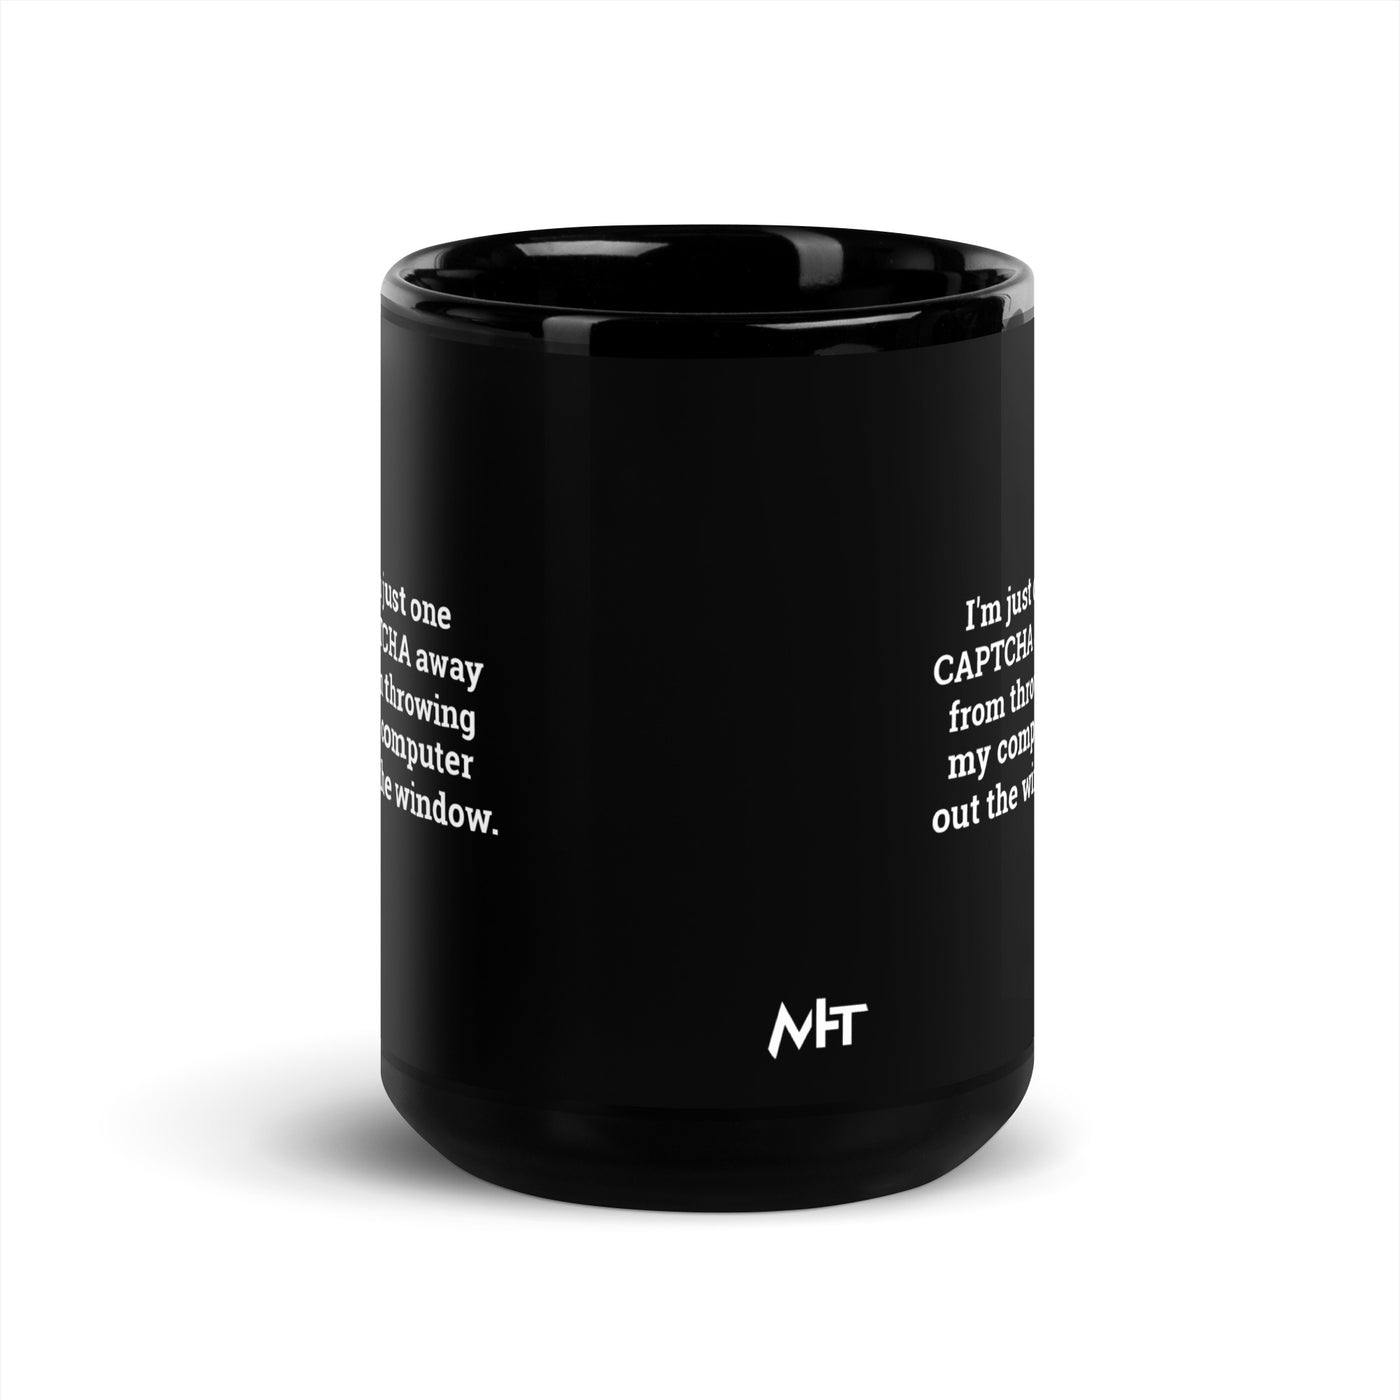 I'm Just one CAPTCHA away from throwing my Computer away V2 - Black Glossy Mug